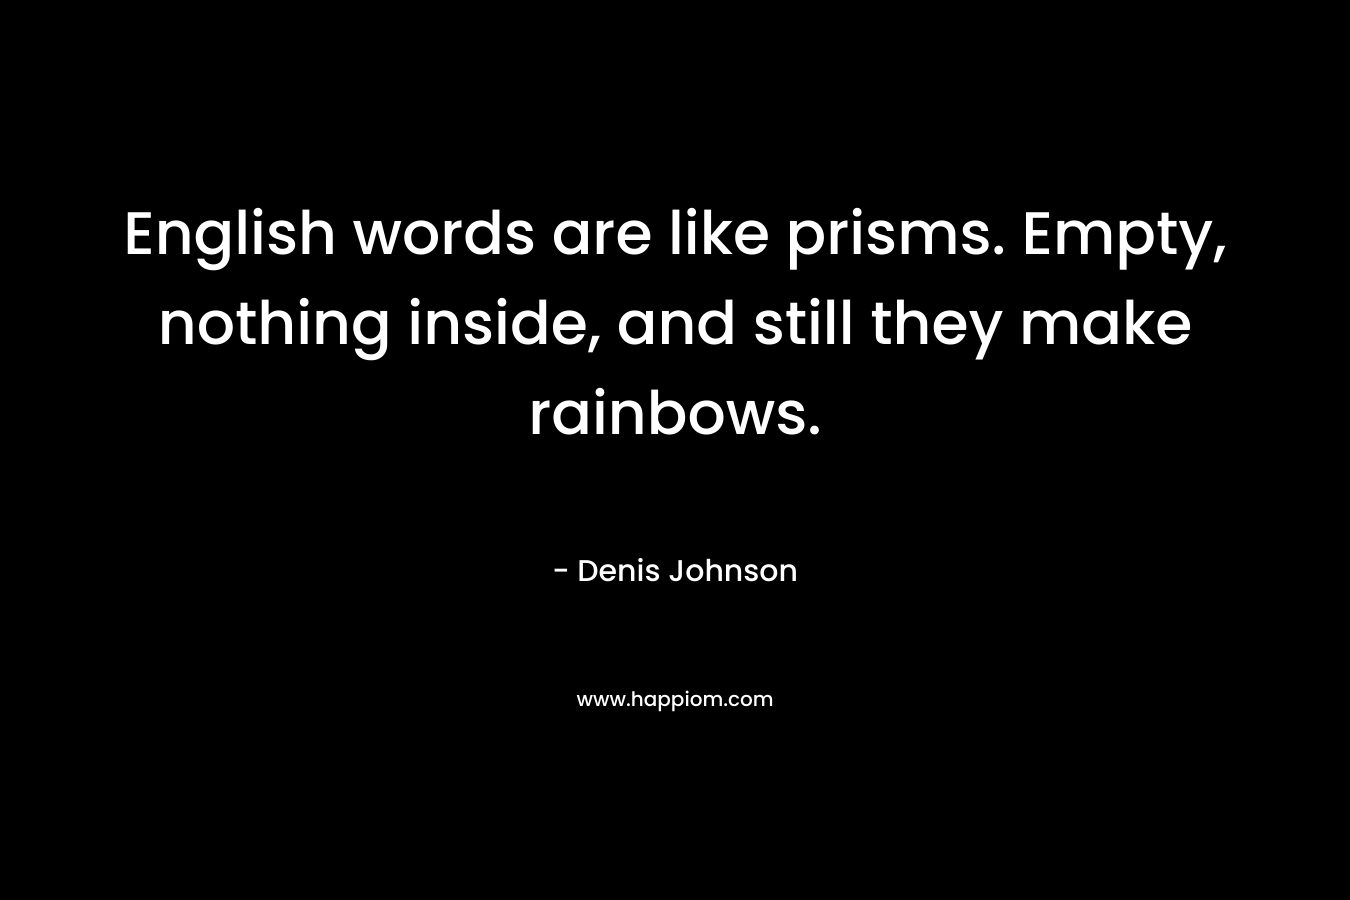 English words are like prisms. Empty, nothing inside, and still they make rainbows. – Denis Johnson